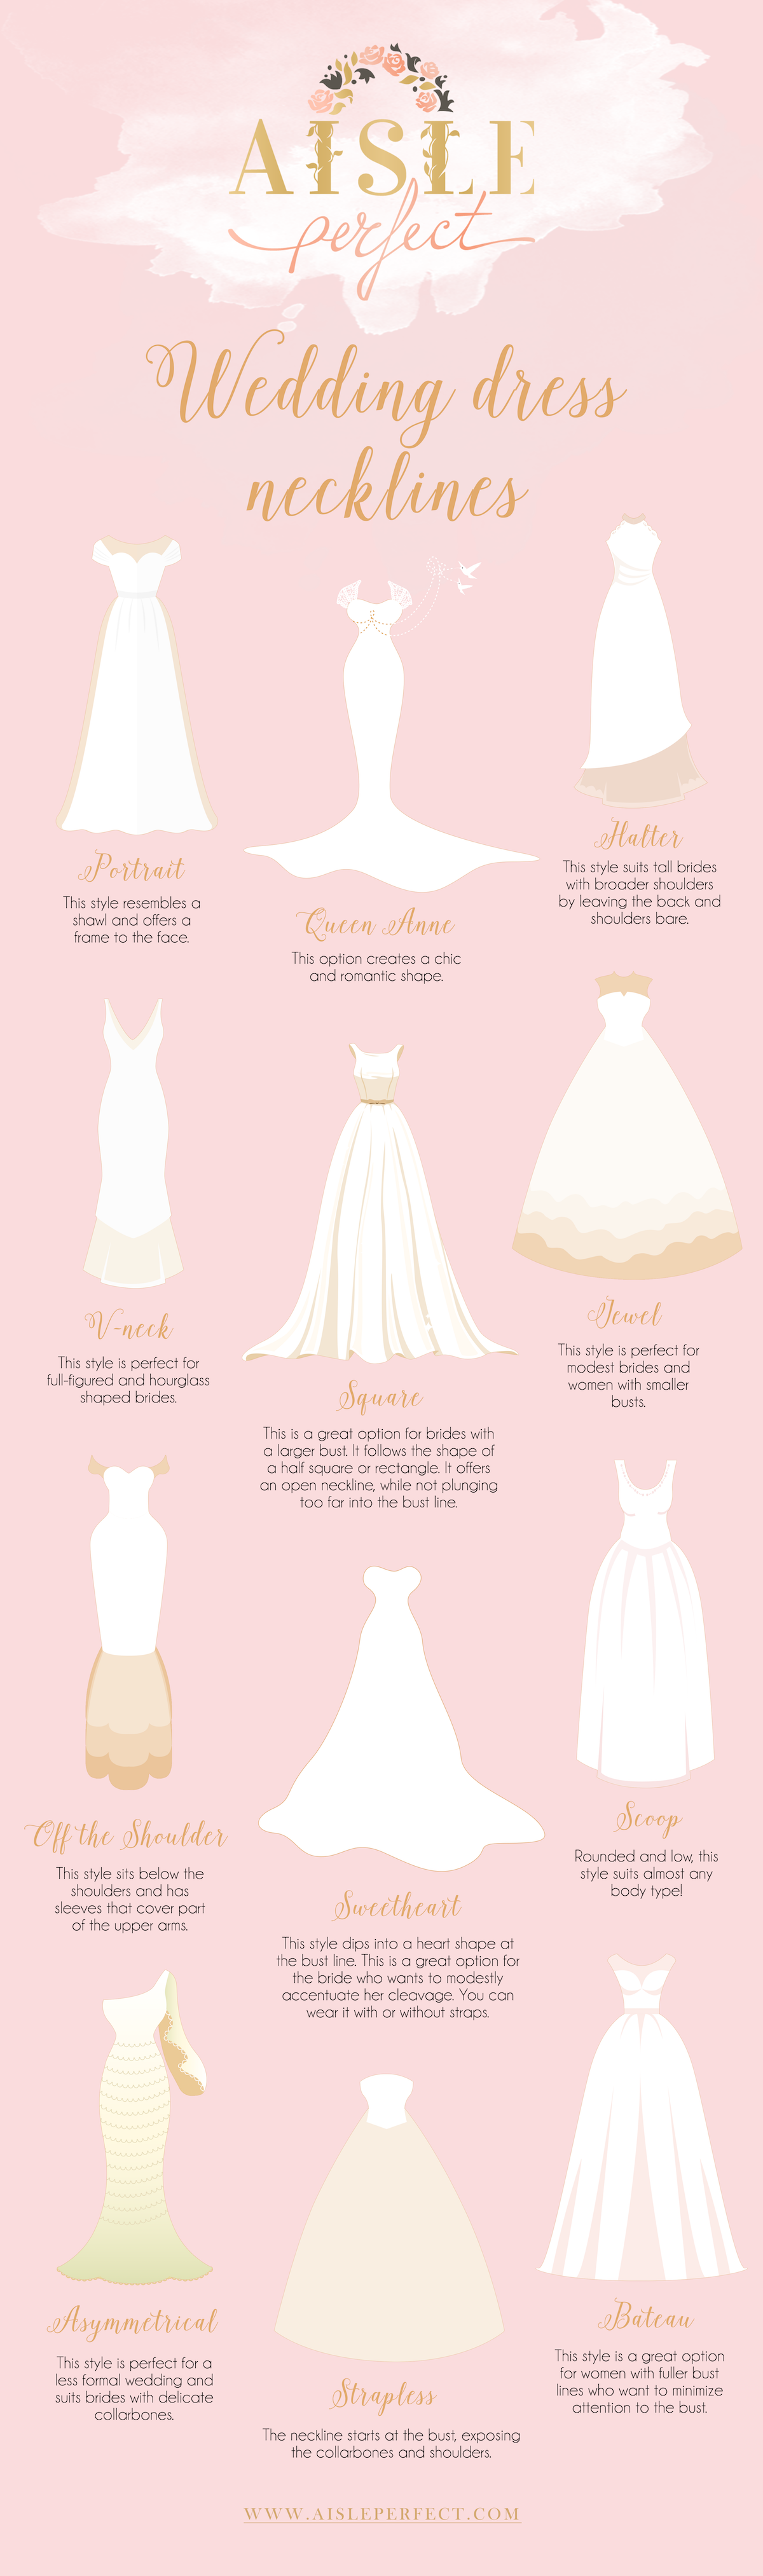 All About Wedding Dress Necklines - Perfete